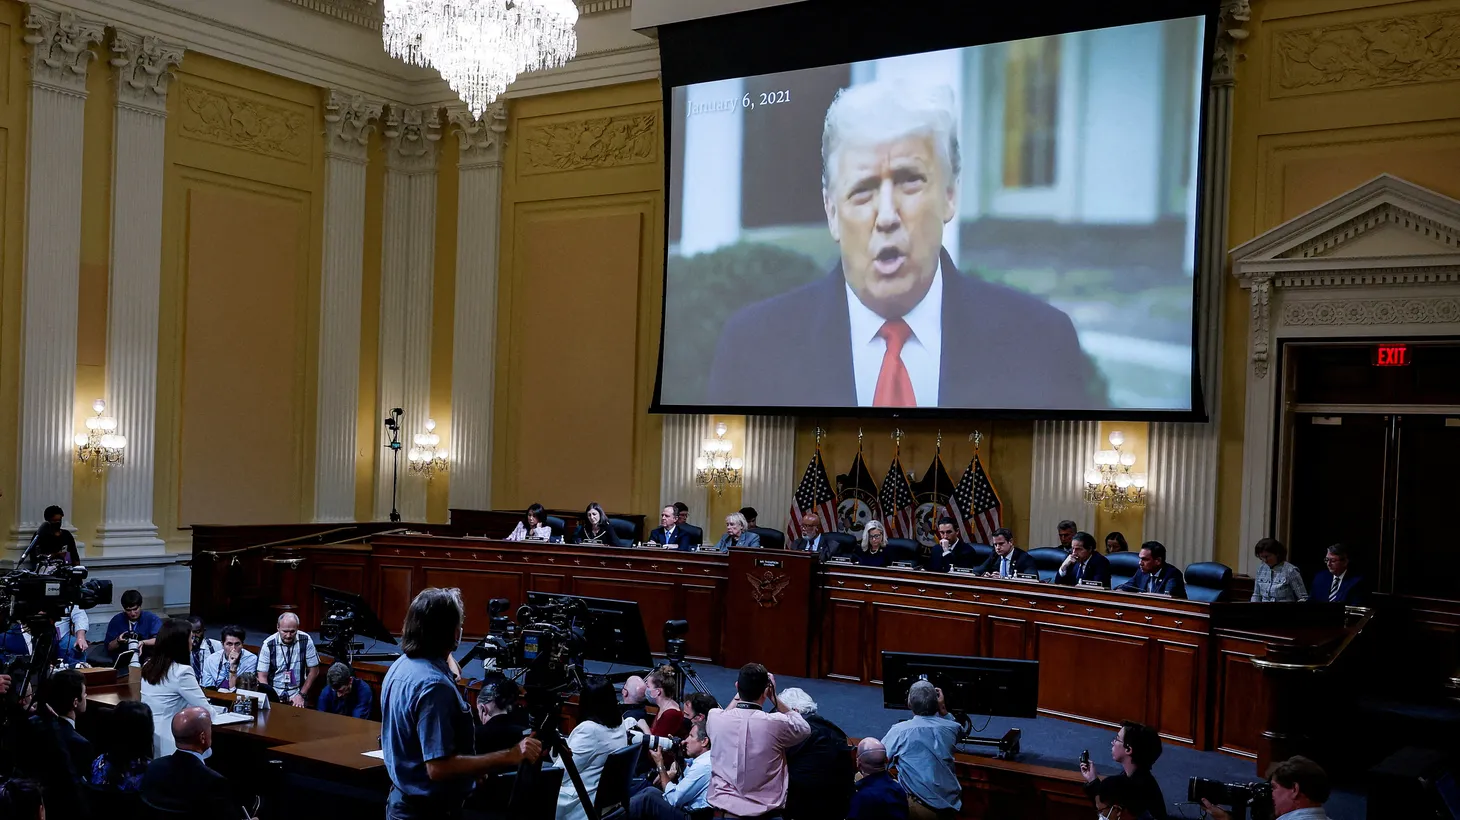 A video of former U.S. President Donald Trump is played as Cassidy Hutchinson, who was an aide to former White House Chief of Staff Mark Meadows during the Trump administration, testifies during a House Select Committee public hearing that investigates the January 6 attack on the U.S. Capitol, in Washington, U.S., June 28, 2022.